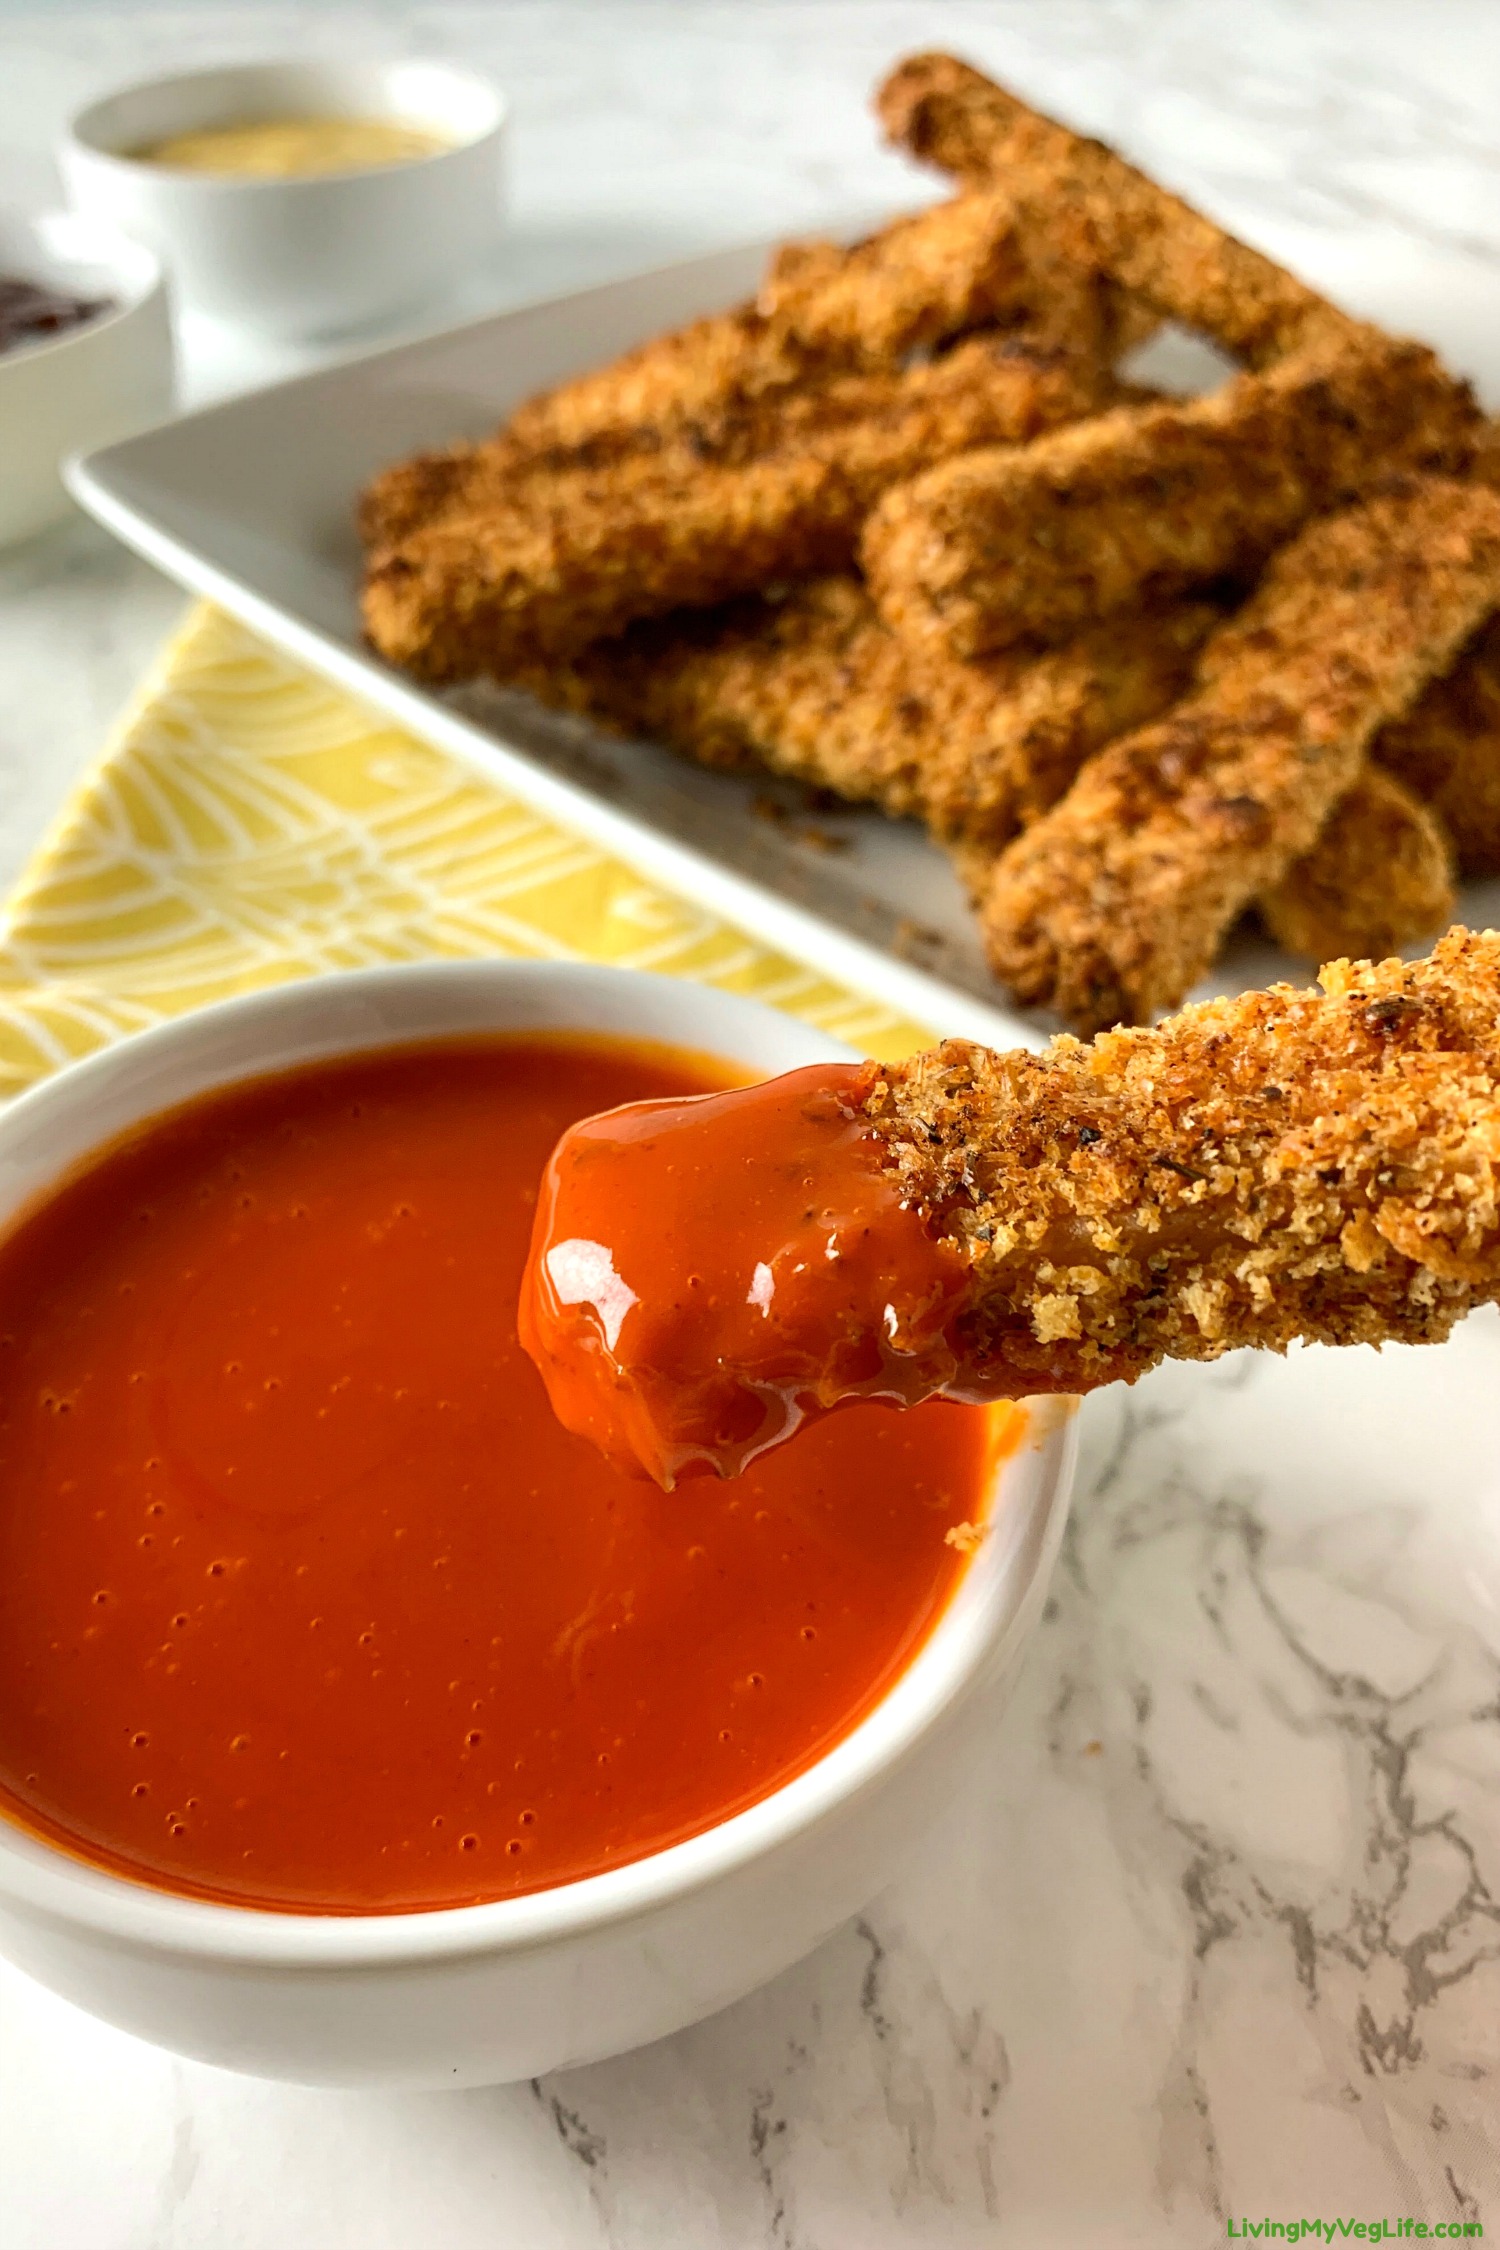 baked tofu fries dipped in sauce